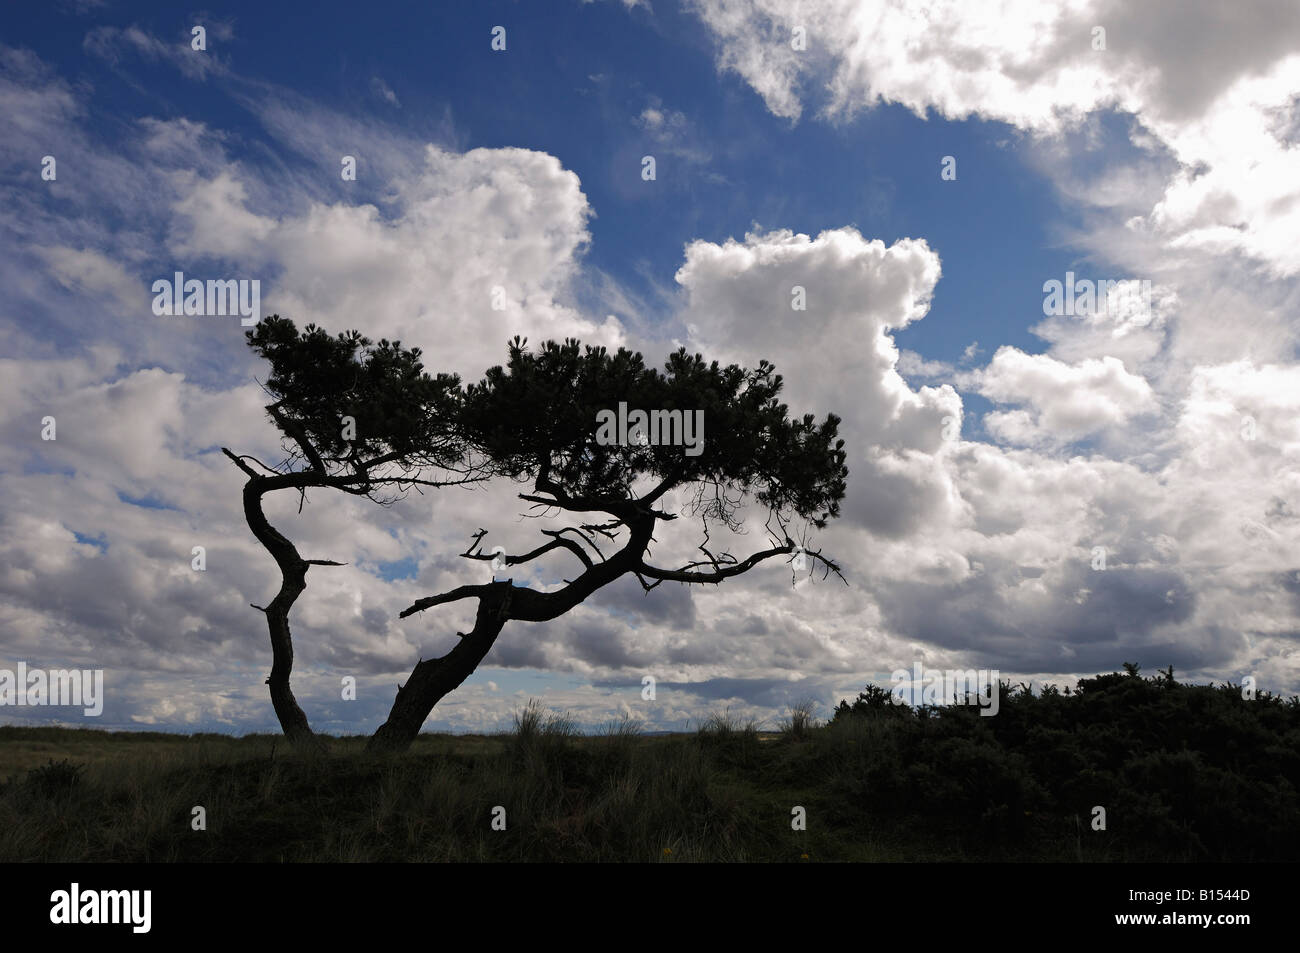 Stunted Scots pines in an open savannah type of landscape under a summer sky near Golspie Sutherland n e Scotland Stock Photo